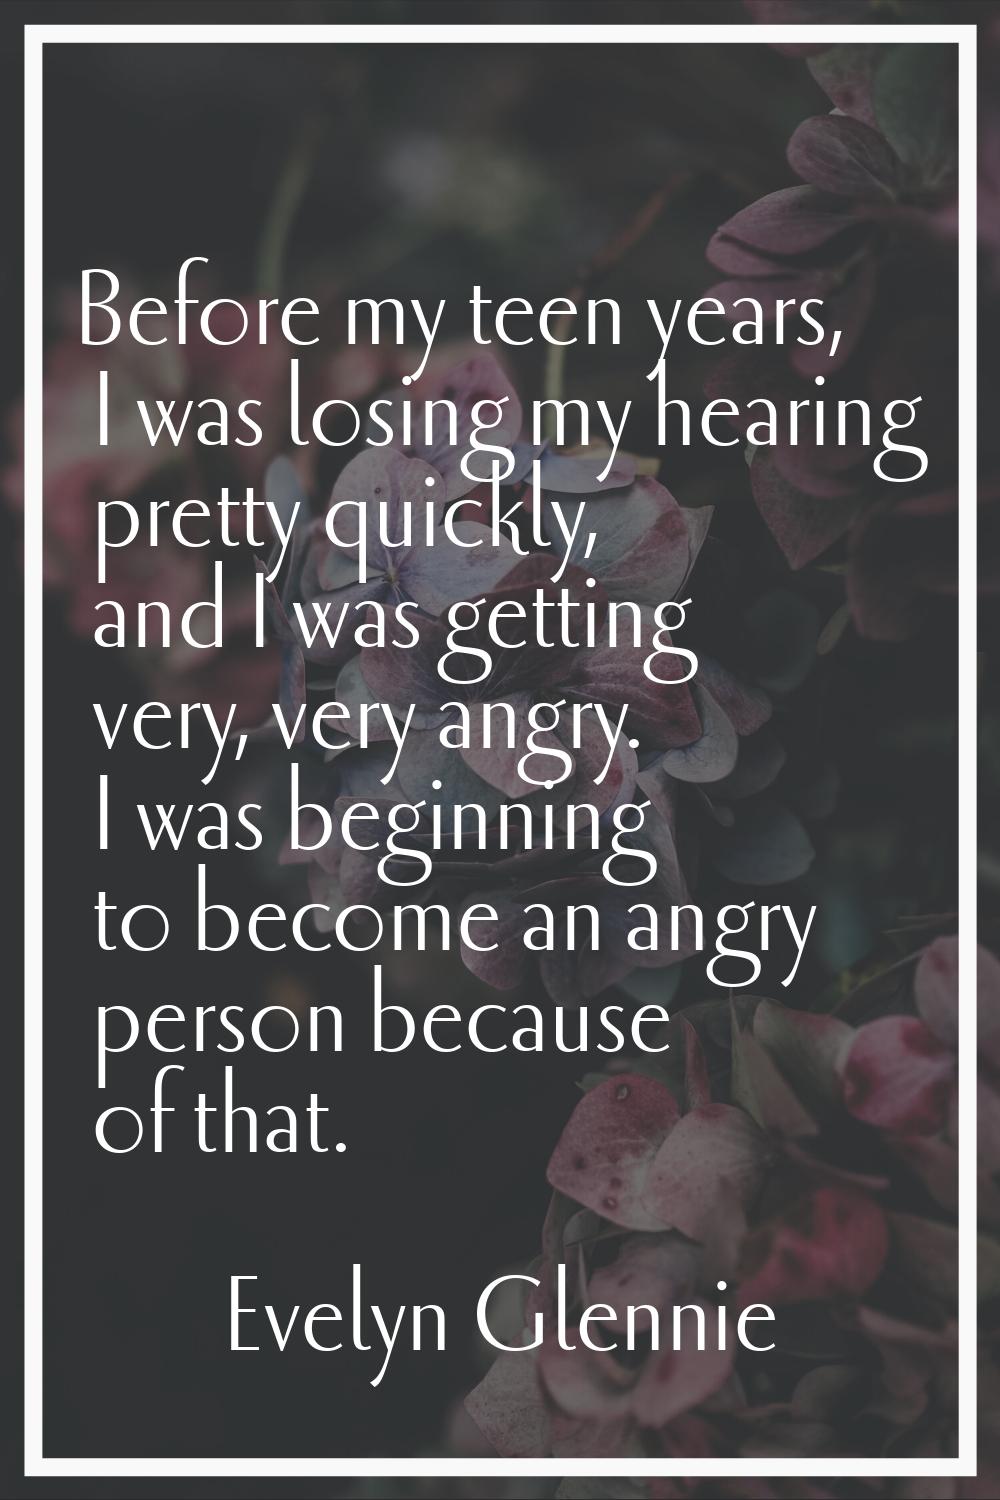 Before my teen years, I was losing my hearing pretty quickly, and I was getting very, very angry. I